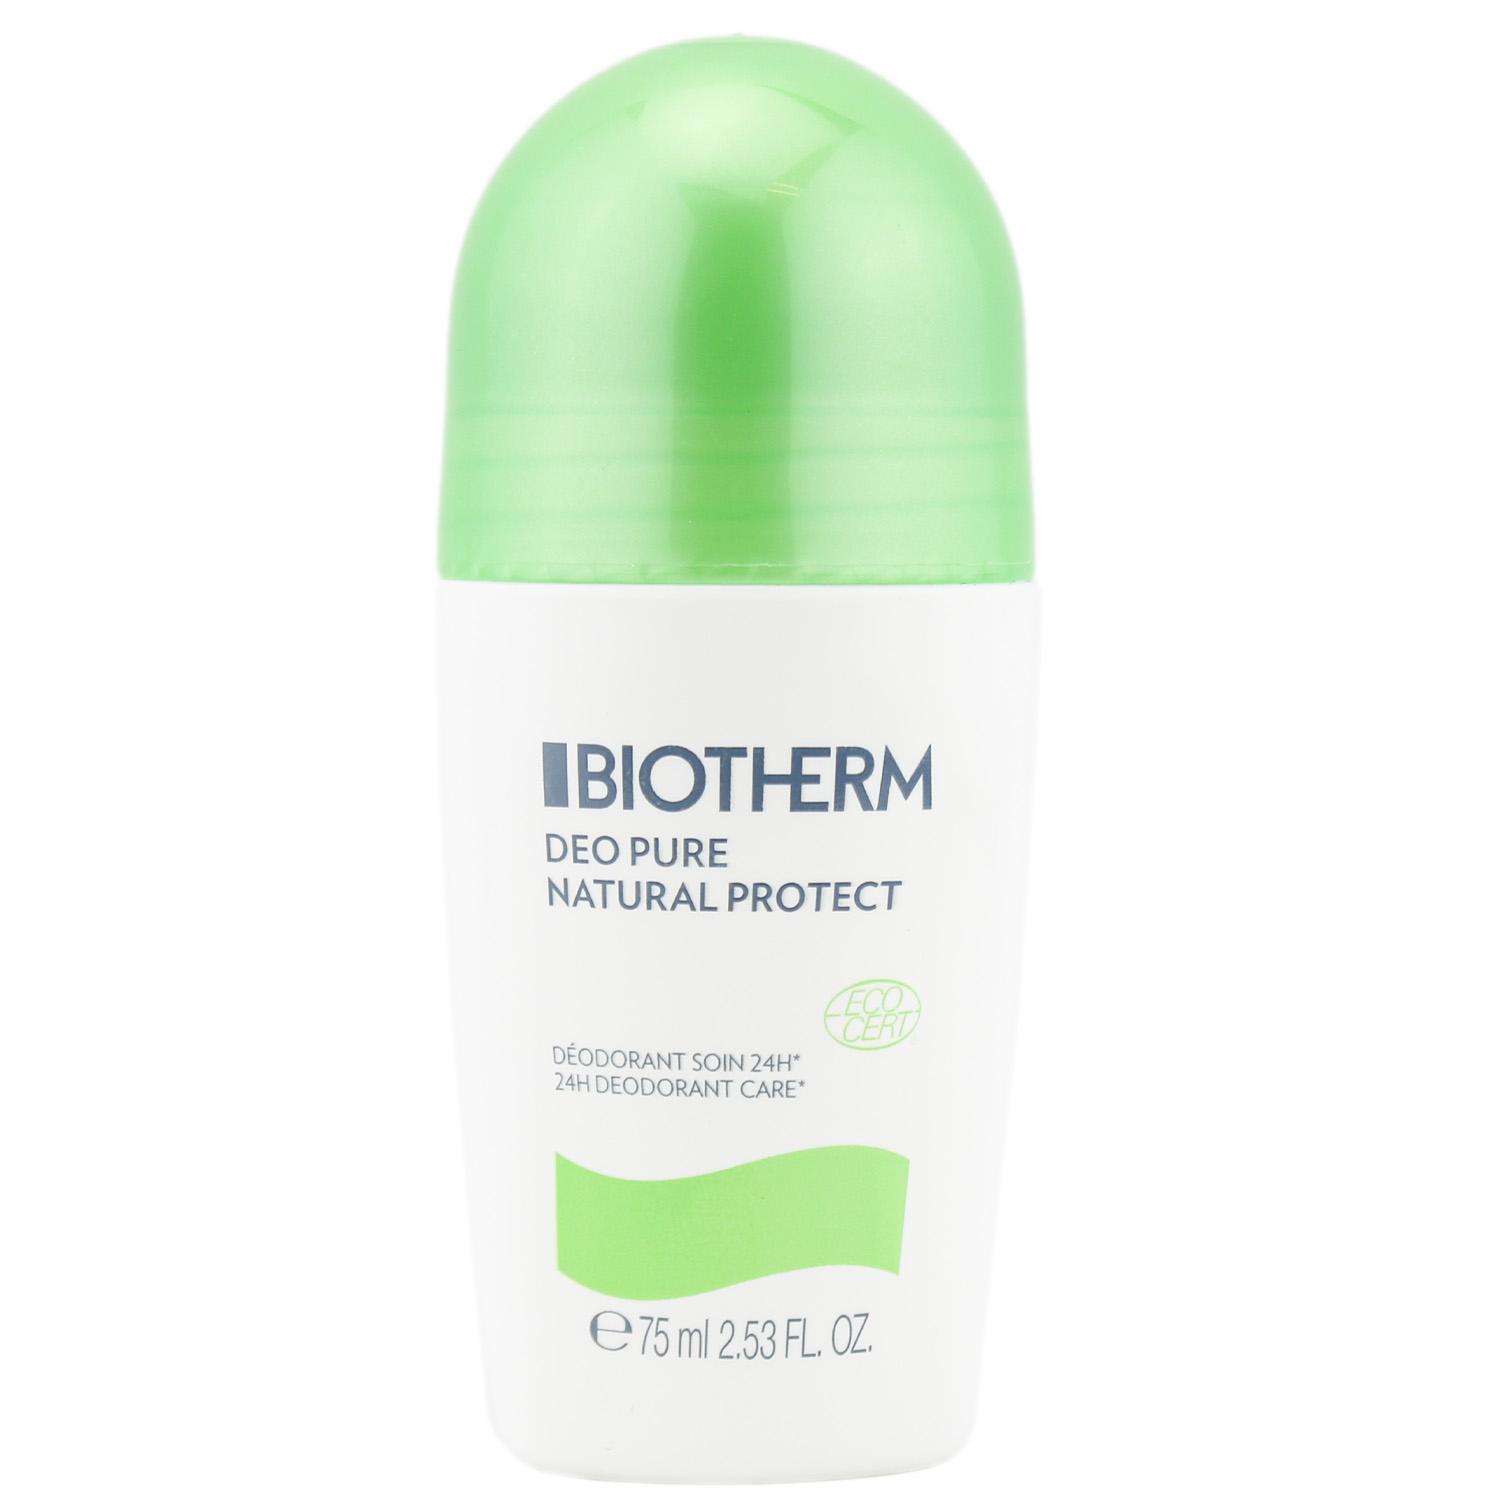 Biotherm Deo Pure Natural Protect Deodorant Roll-On 75ml